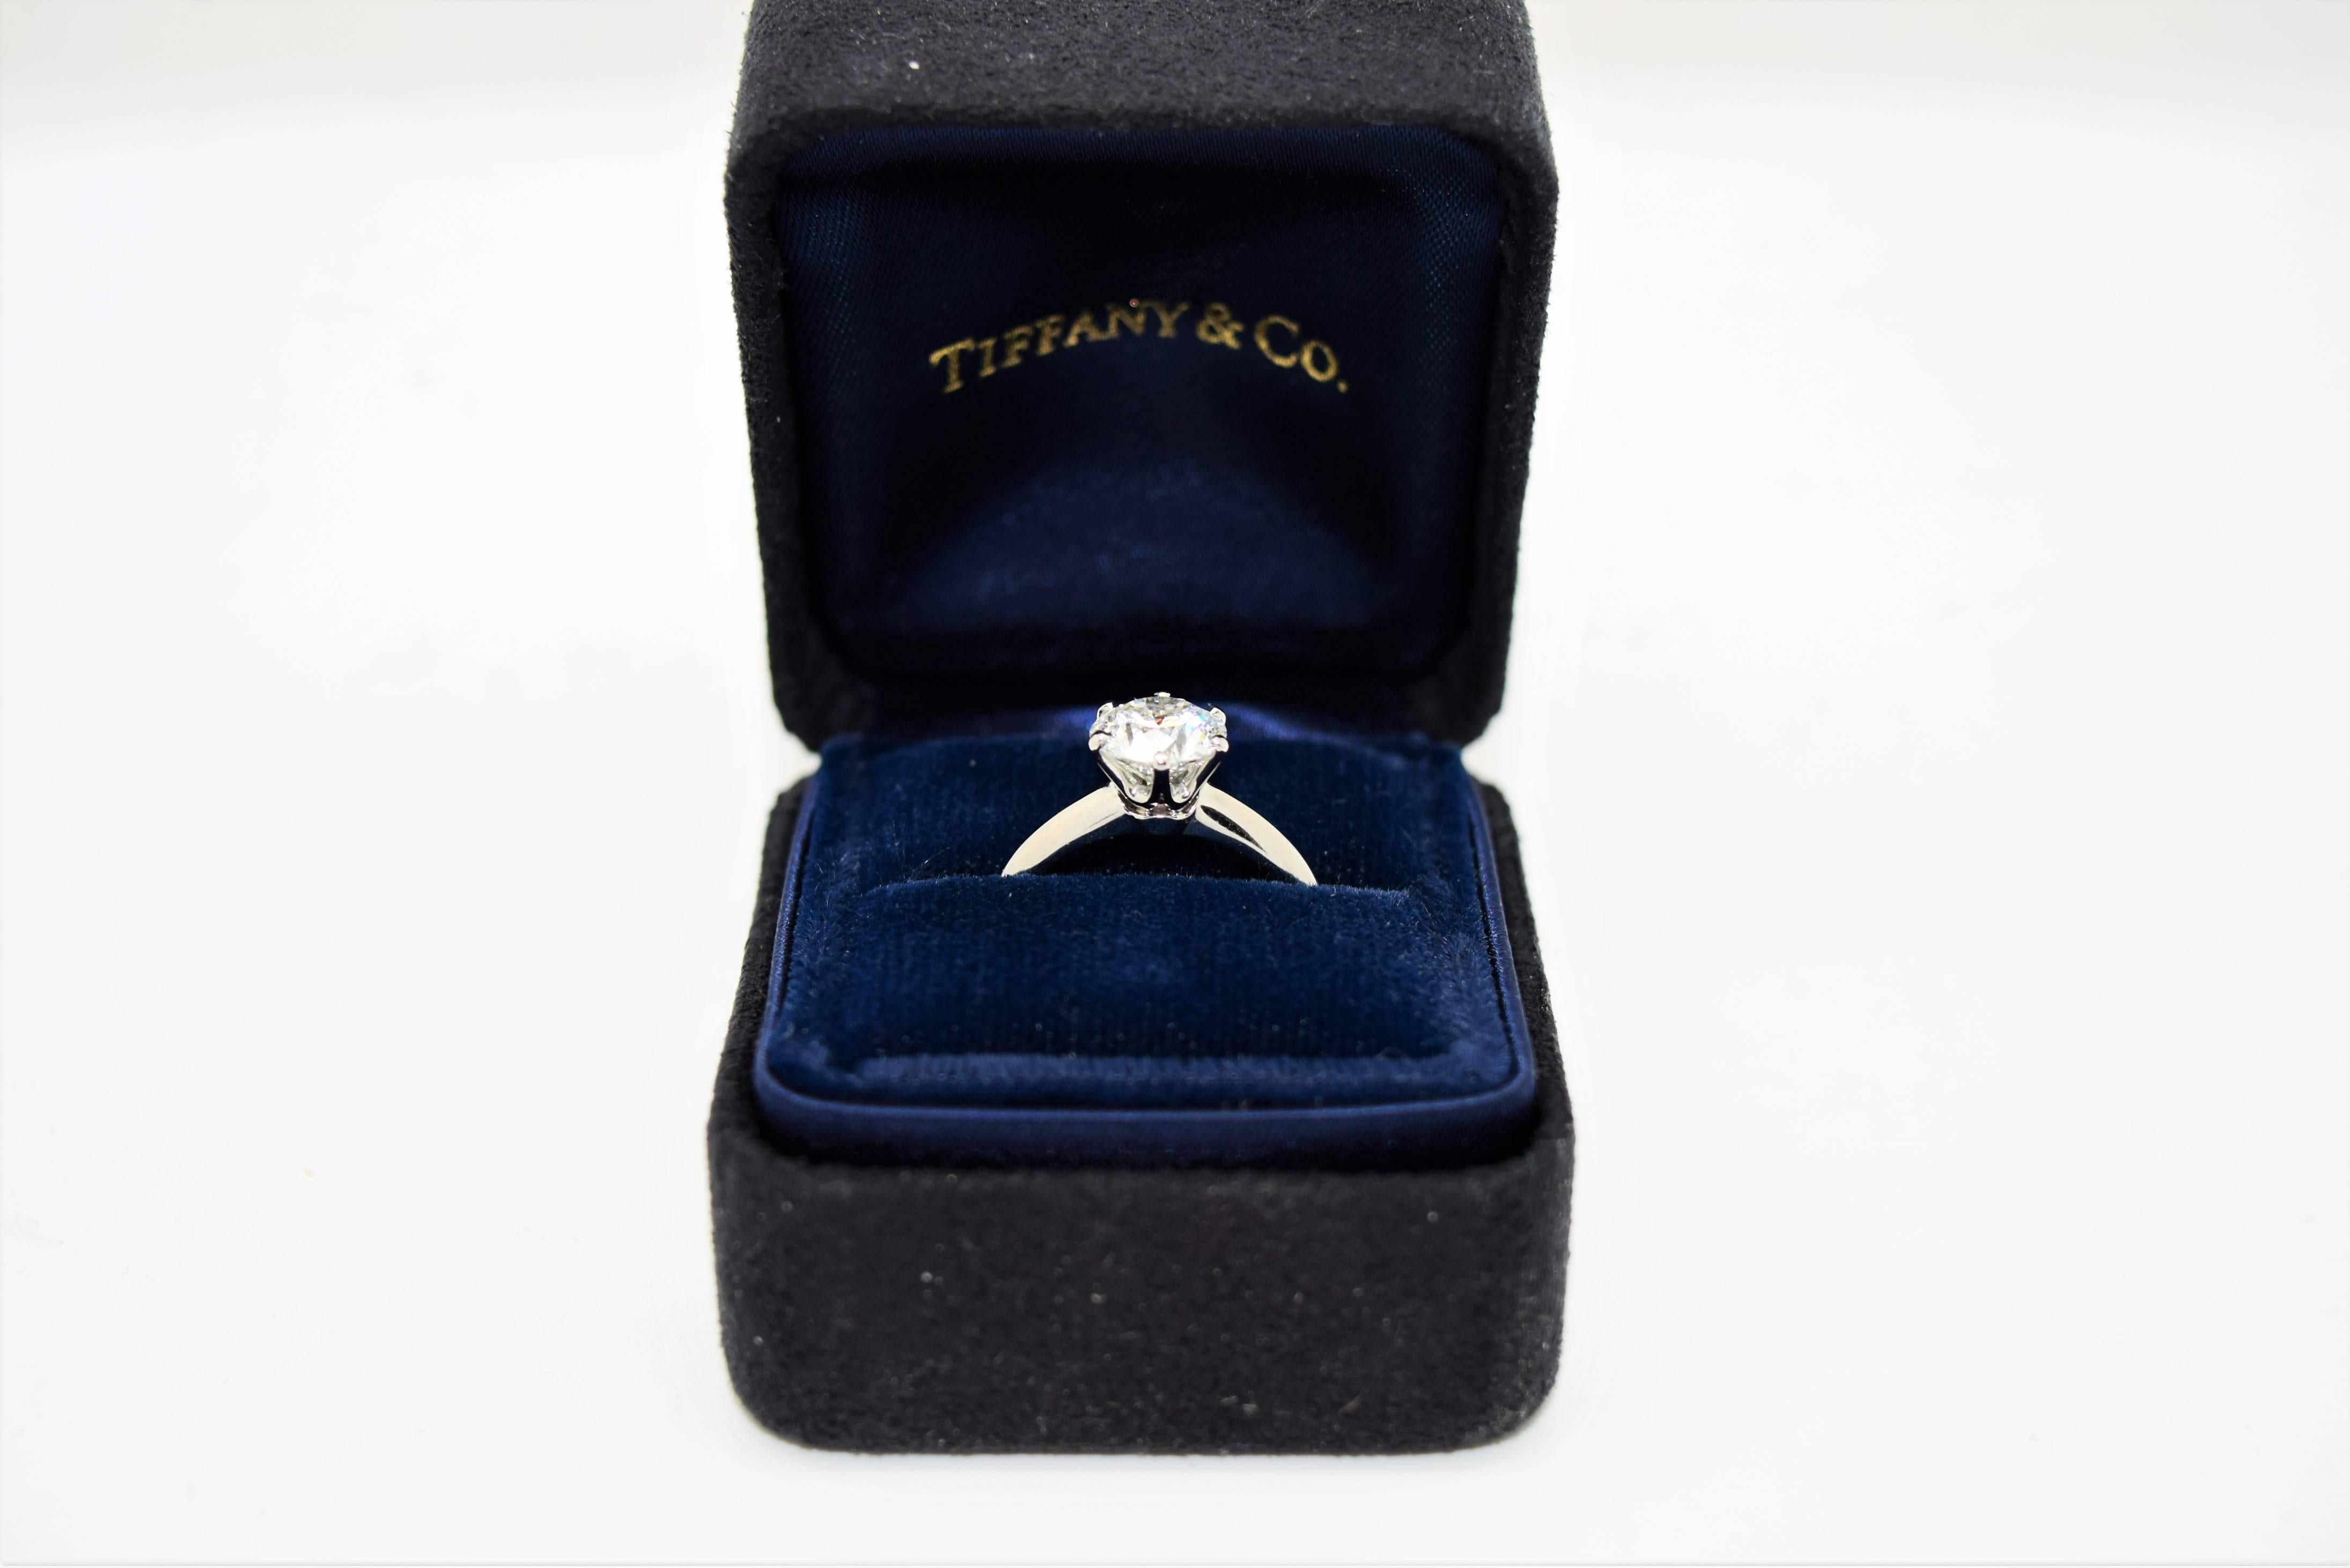 Tiffany & Co. 1.49 Carat Round Diamond Platinum Engagement Ring In Excellent Condition For Sale In Chicago, IL